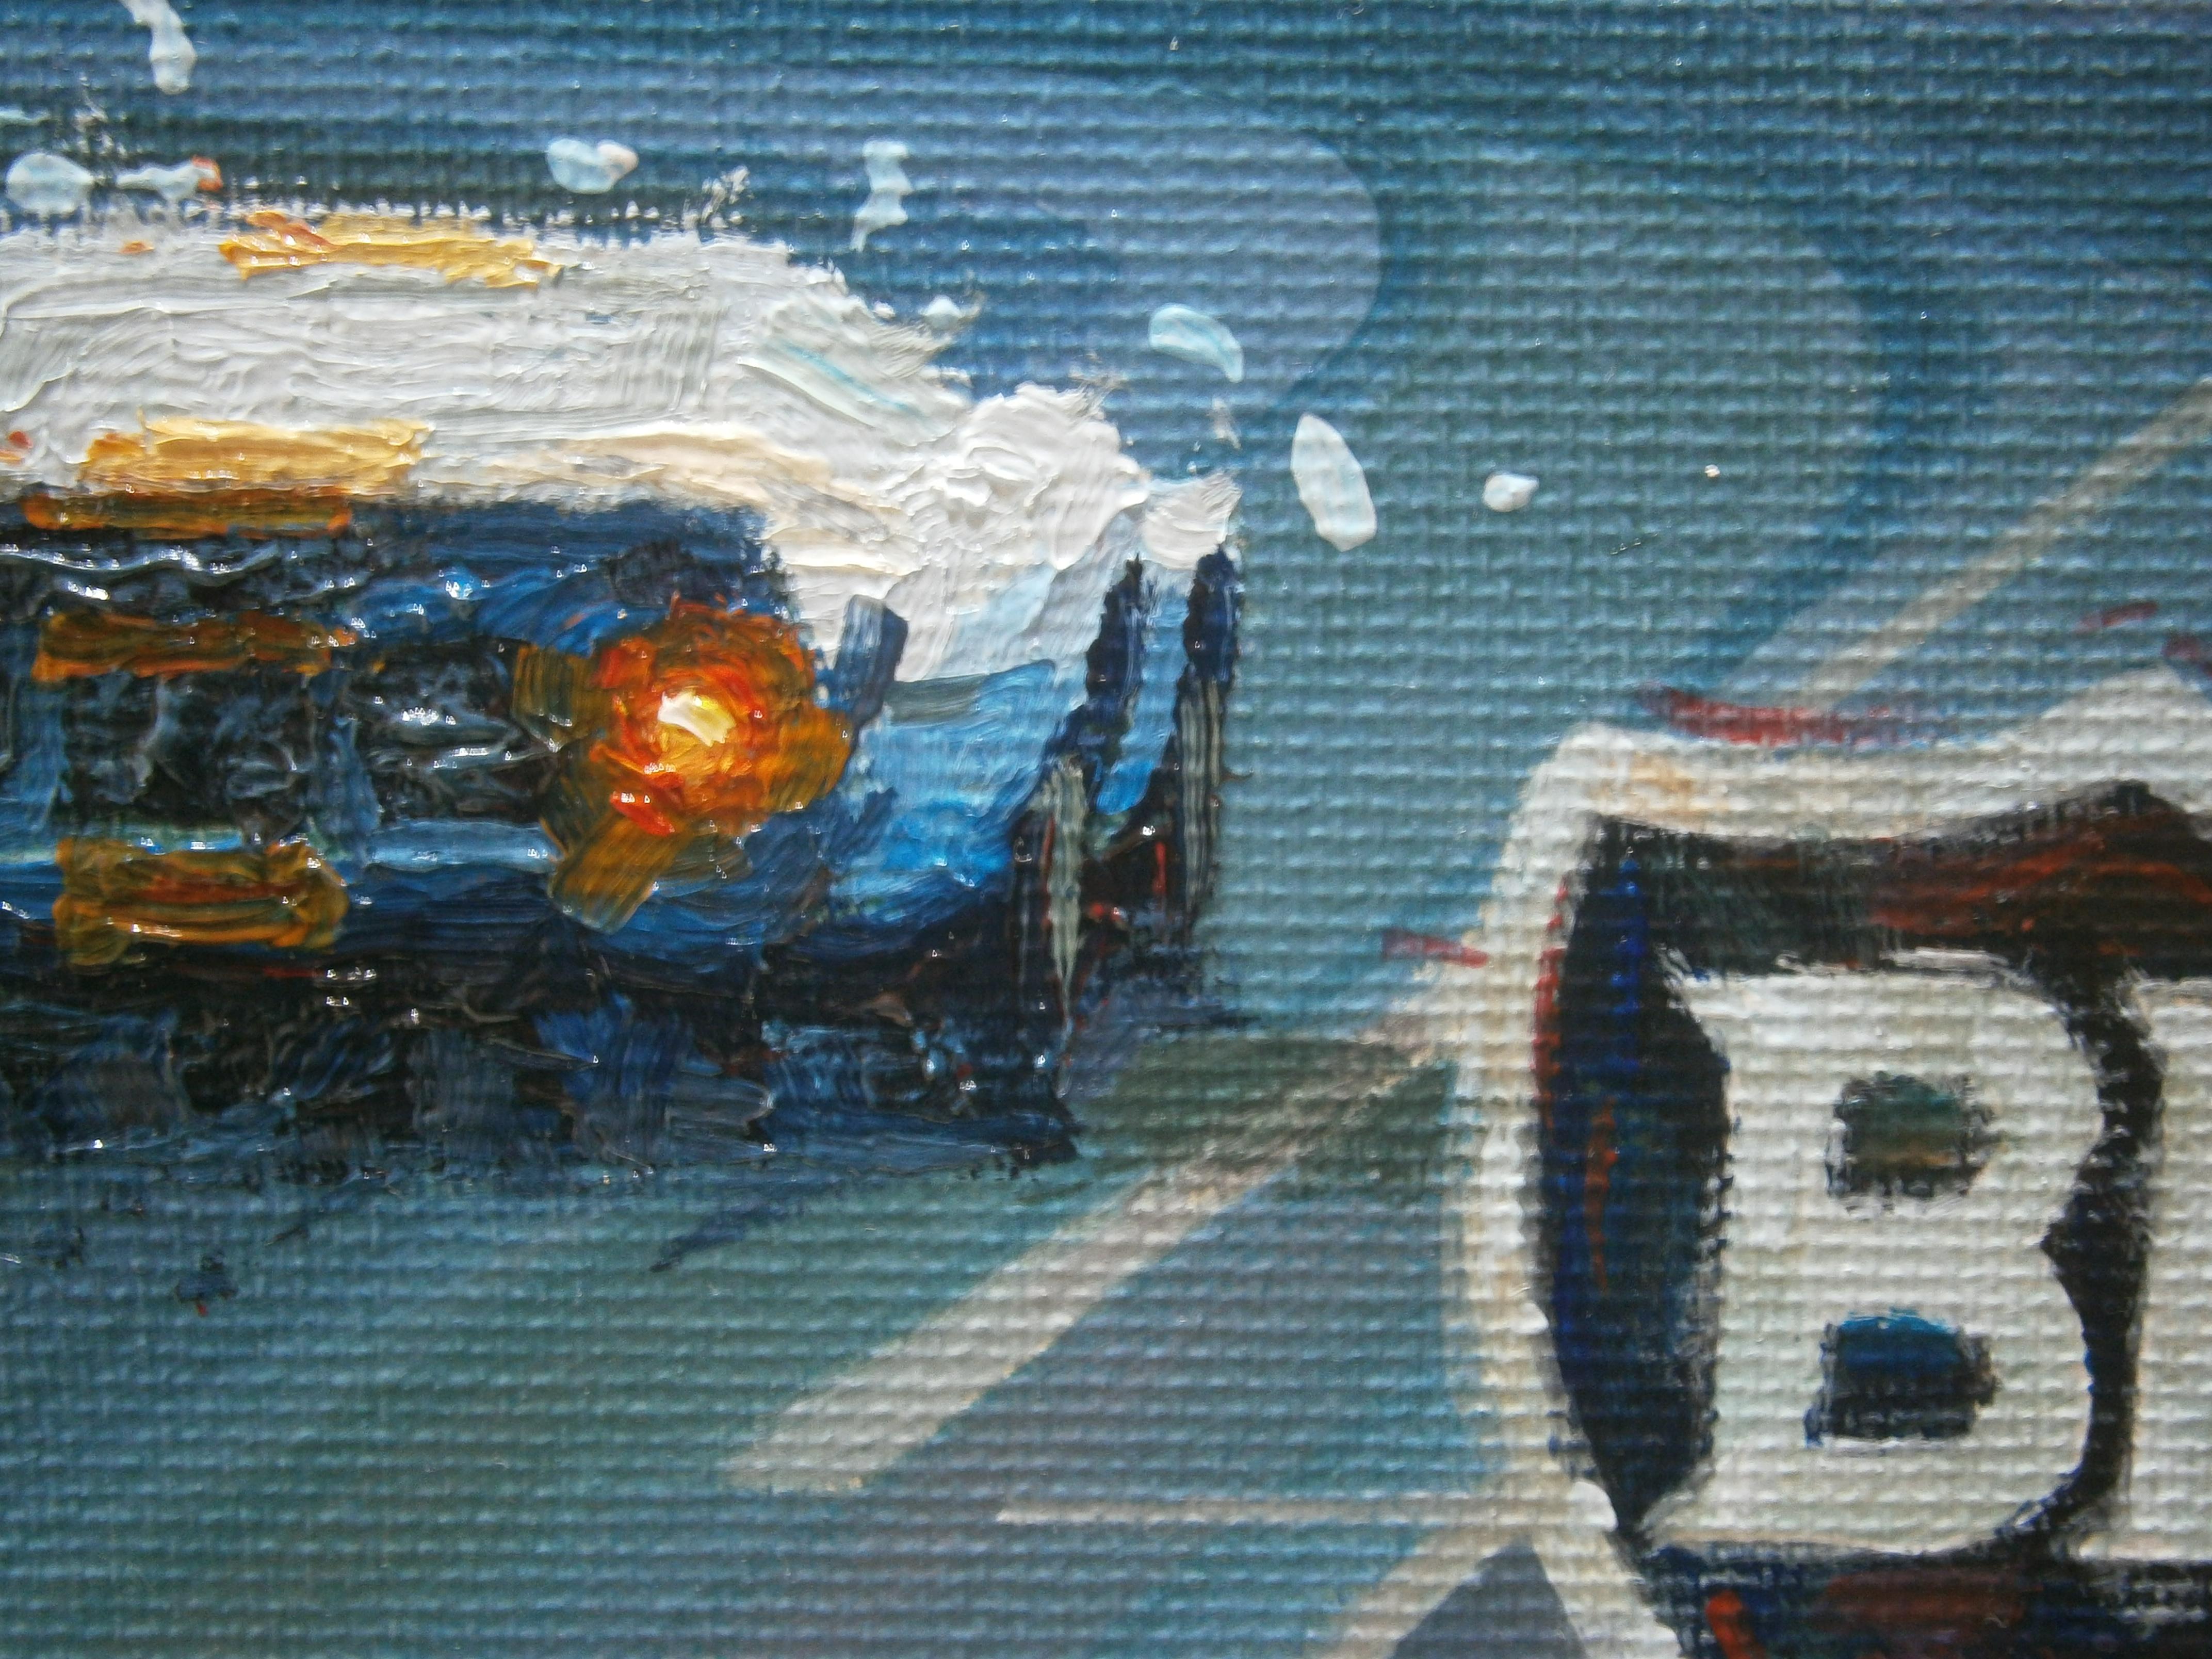 Balaguer Car Races Jacky Ickx Le Mans 1969 Ford GT40 original painting - Expressionist Painting by Alex BALAGUER